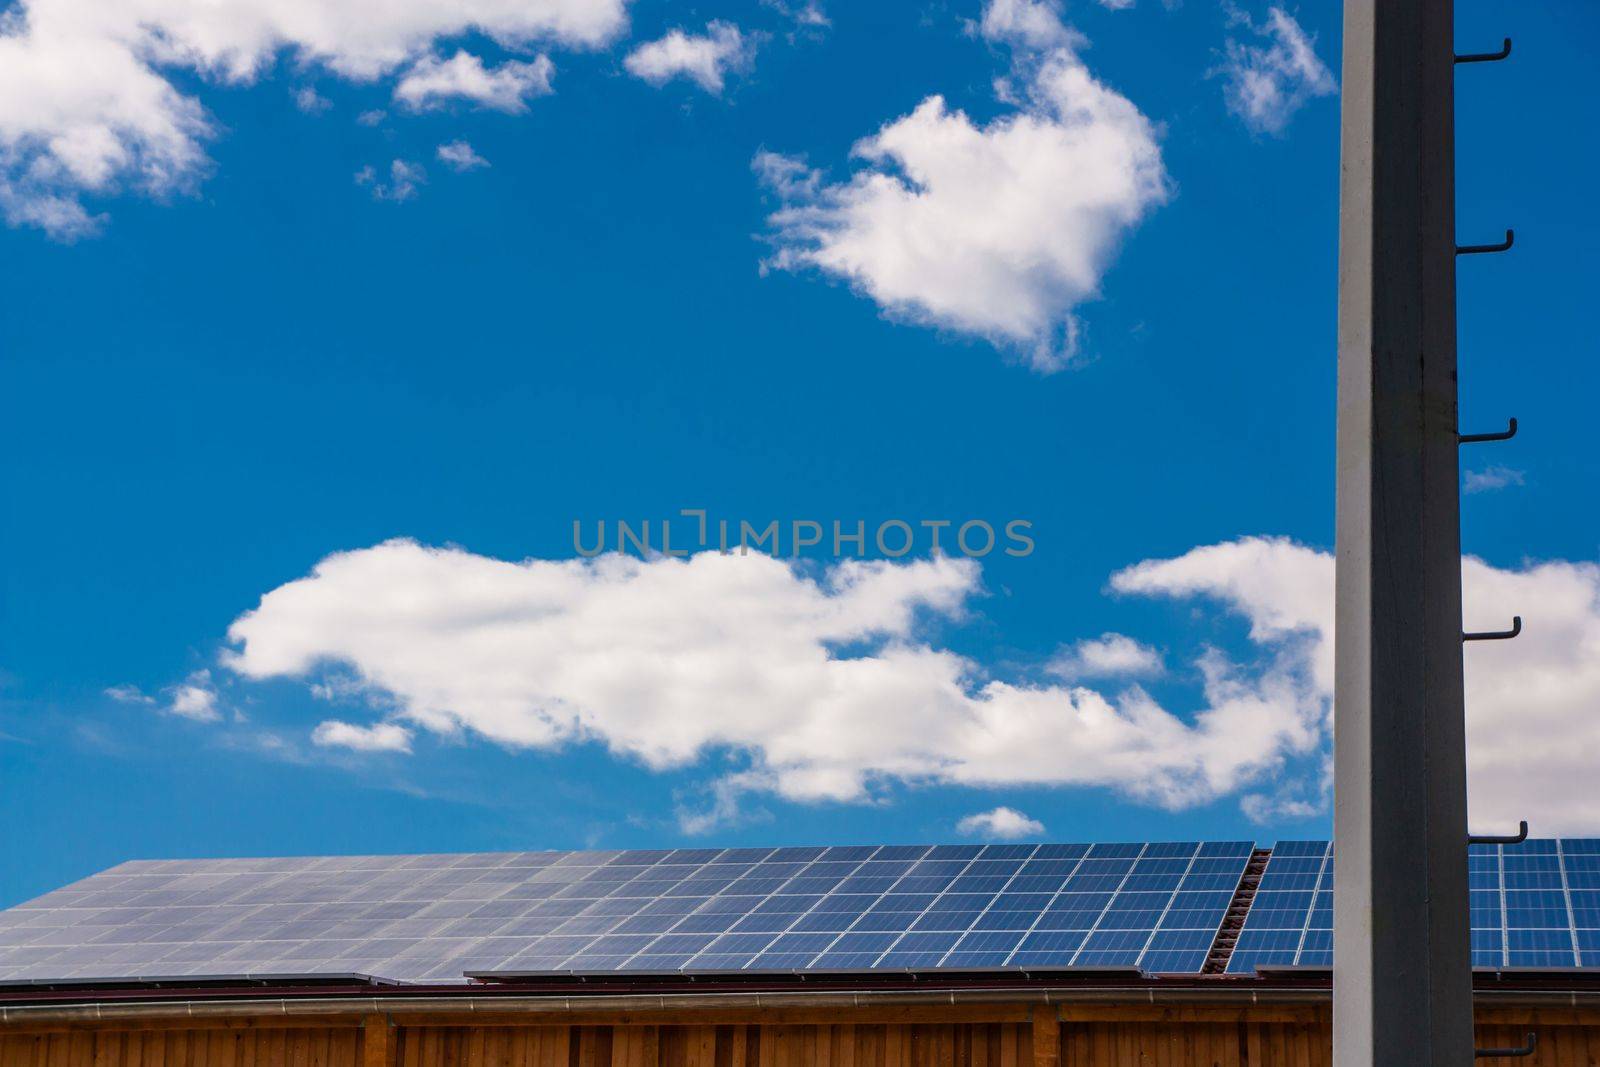 Building with solar panels and sky with white clouds